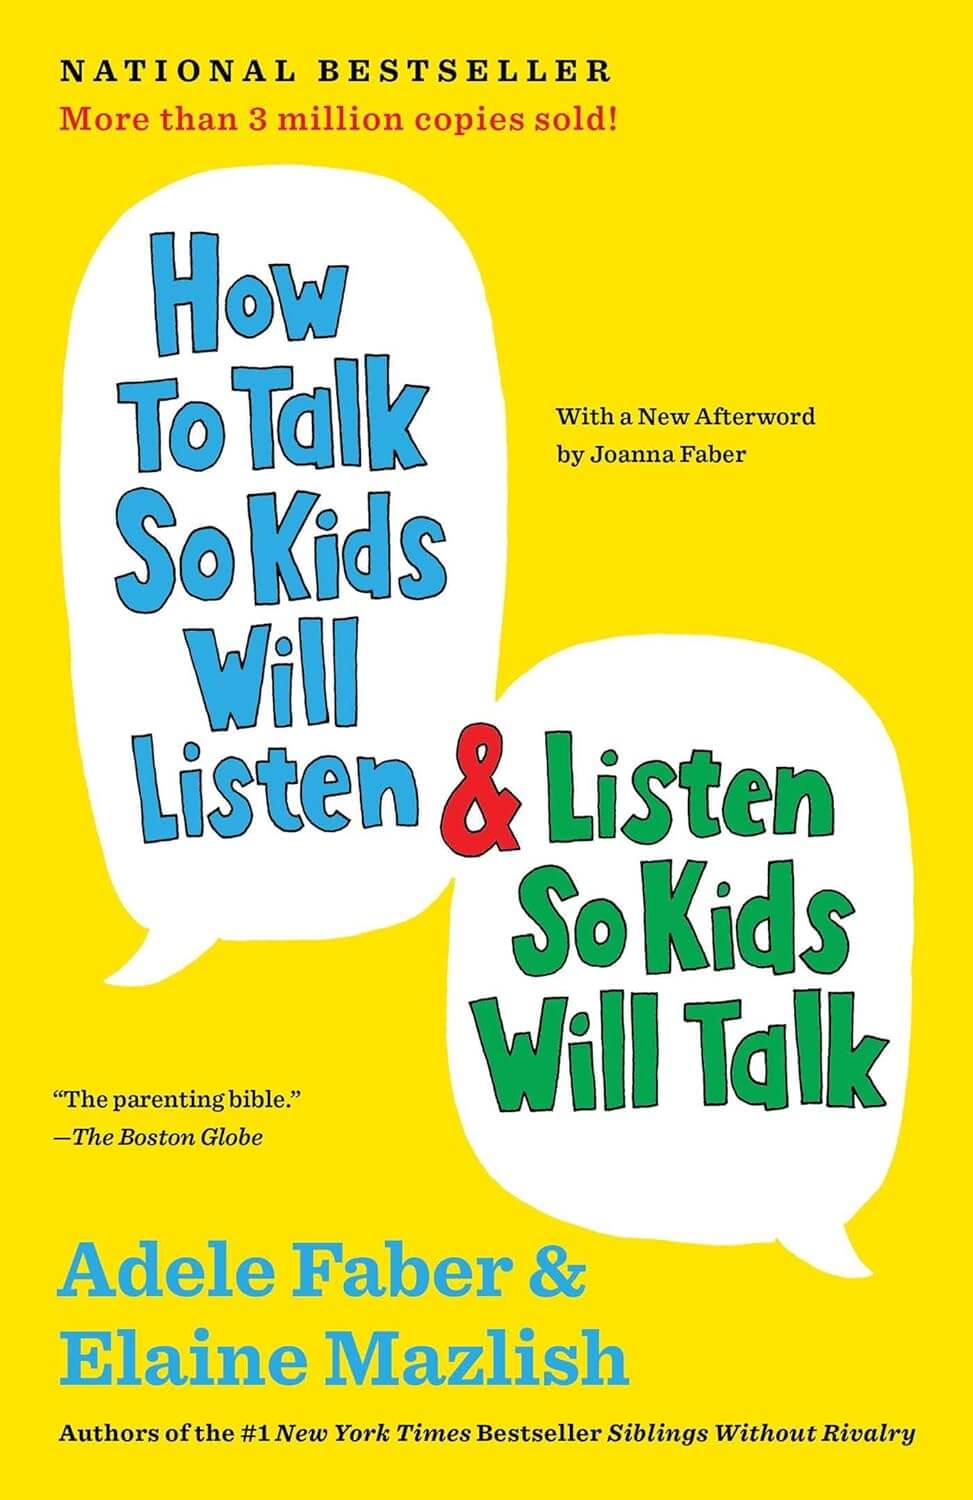 "How To Talk So Kids Will Listen and Listen So Kids Will Talk" by Adele Faber and Elaine Mazlish